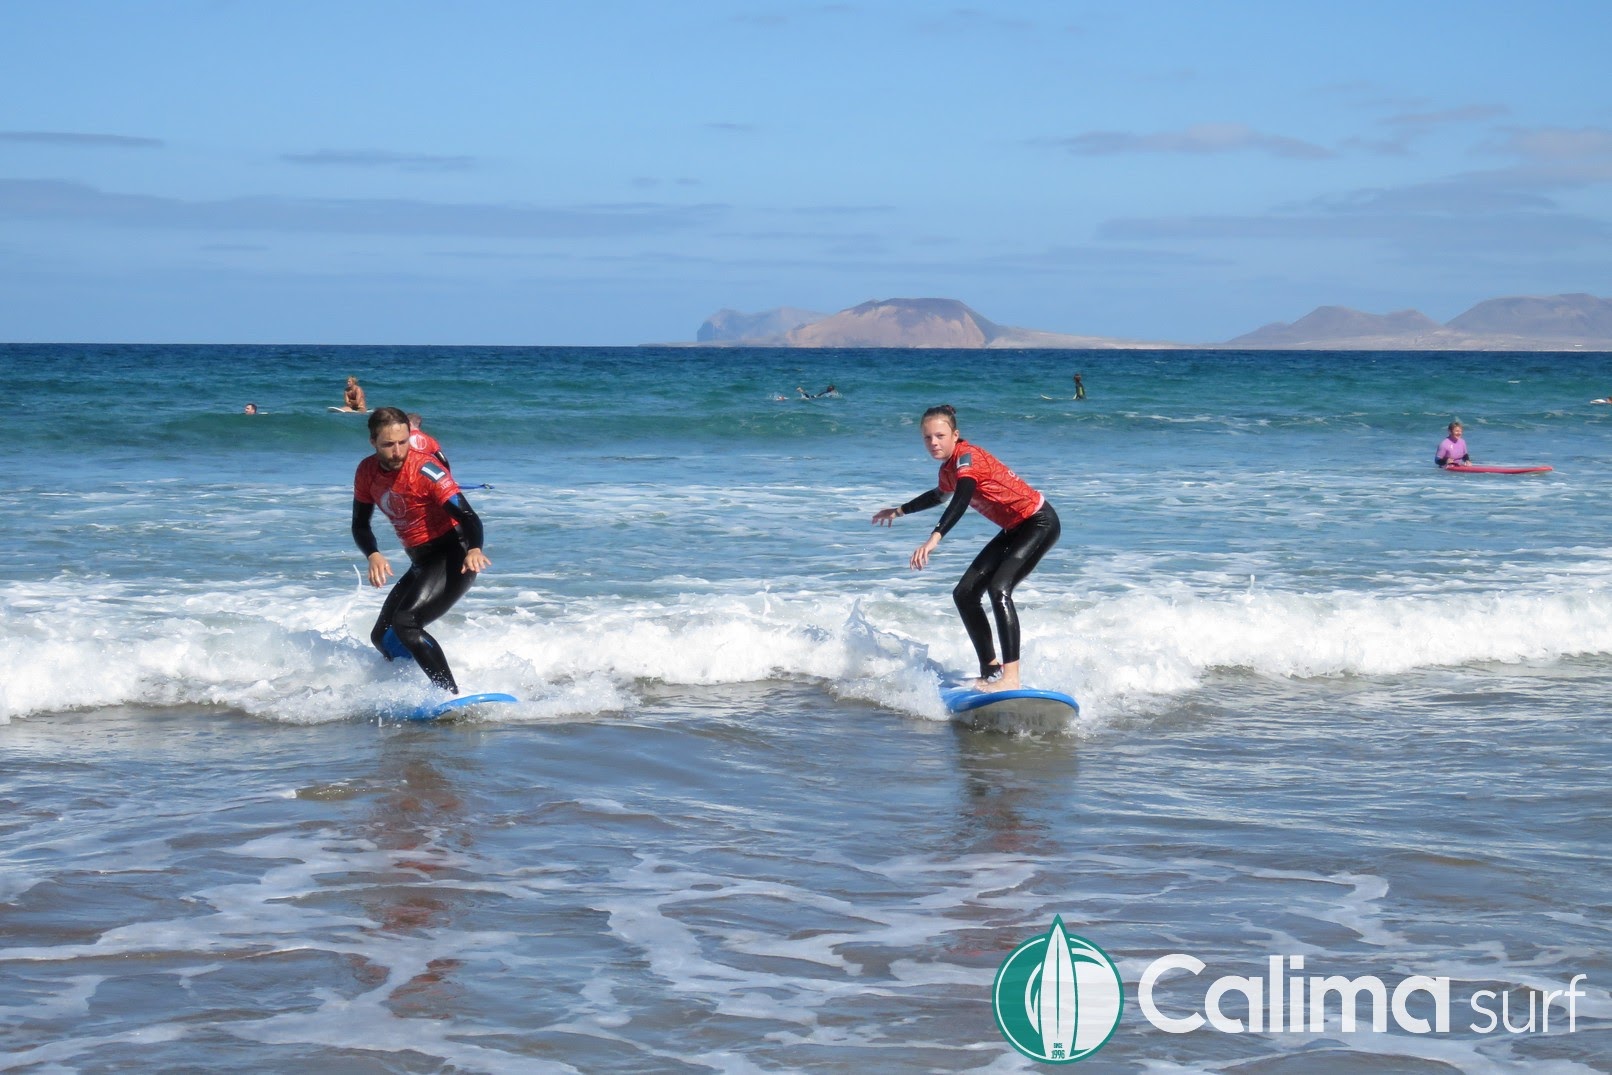 Enjoy a special surf camp pack for couples on New Year’s Eve